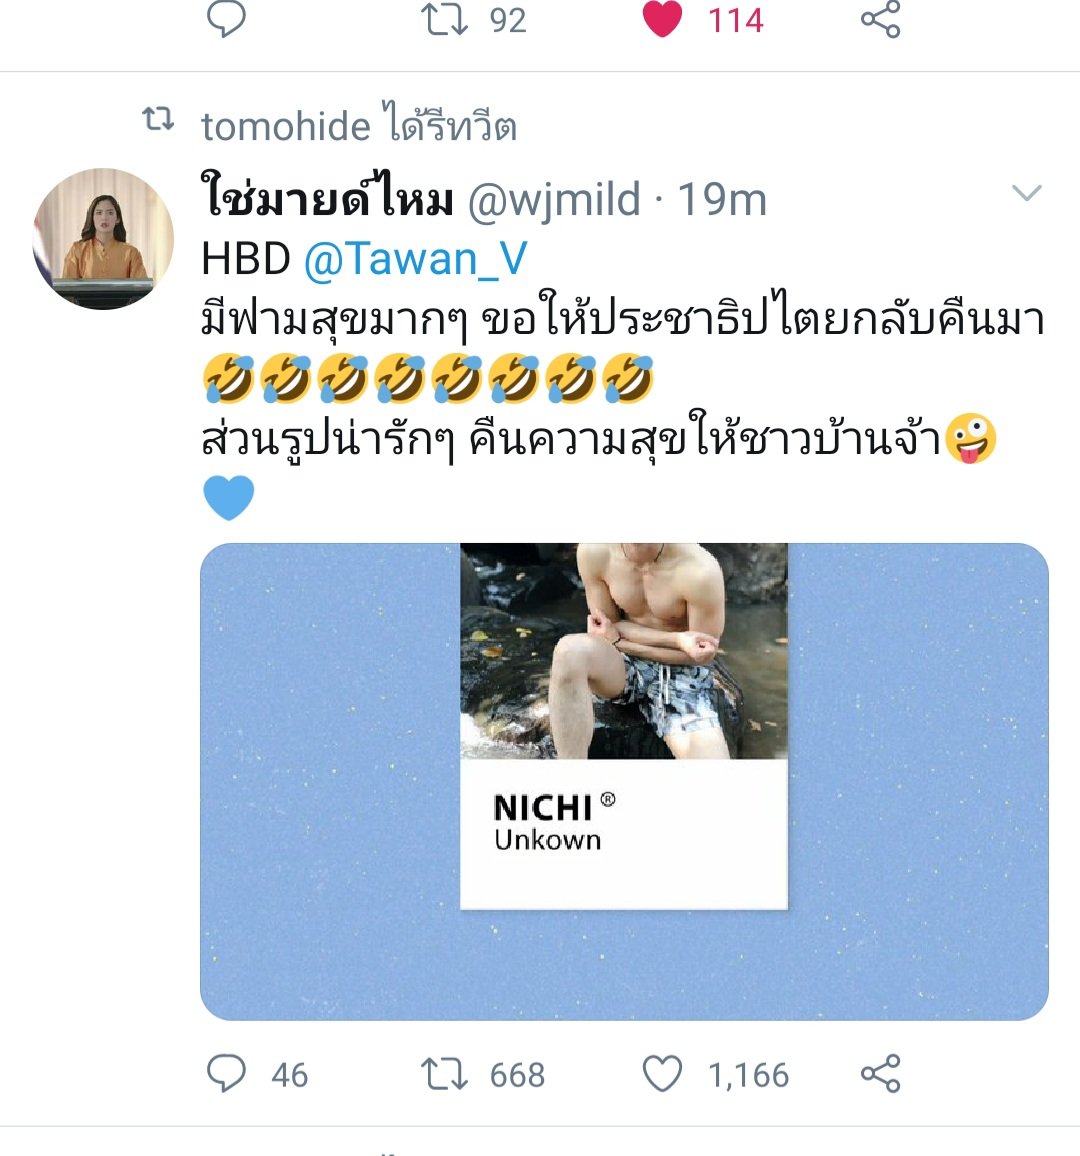  #Wjmild Twitt: HBD. I wish u a happiness.I hope we will get our democracy back too This pic is " sent back happiness" reward for your villagers.Ig: i hope to work with you in more and more series  #Tawan_V  #Taytawan29thbirthday  #Tawan_VBD2020